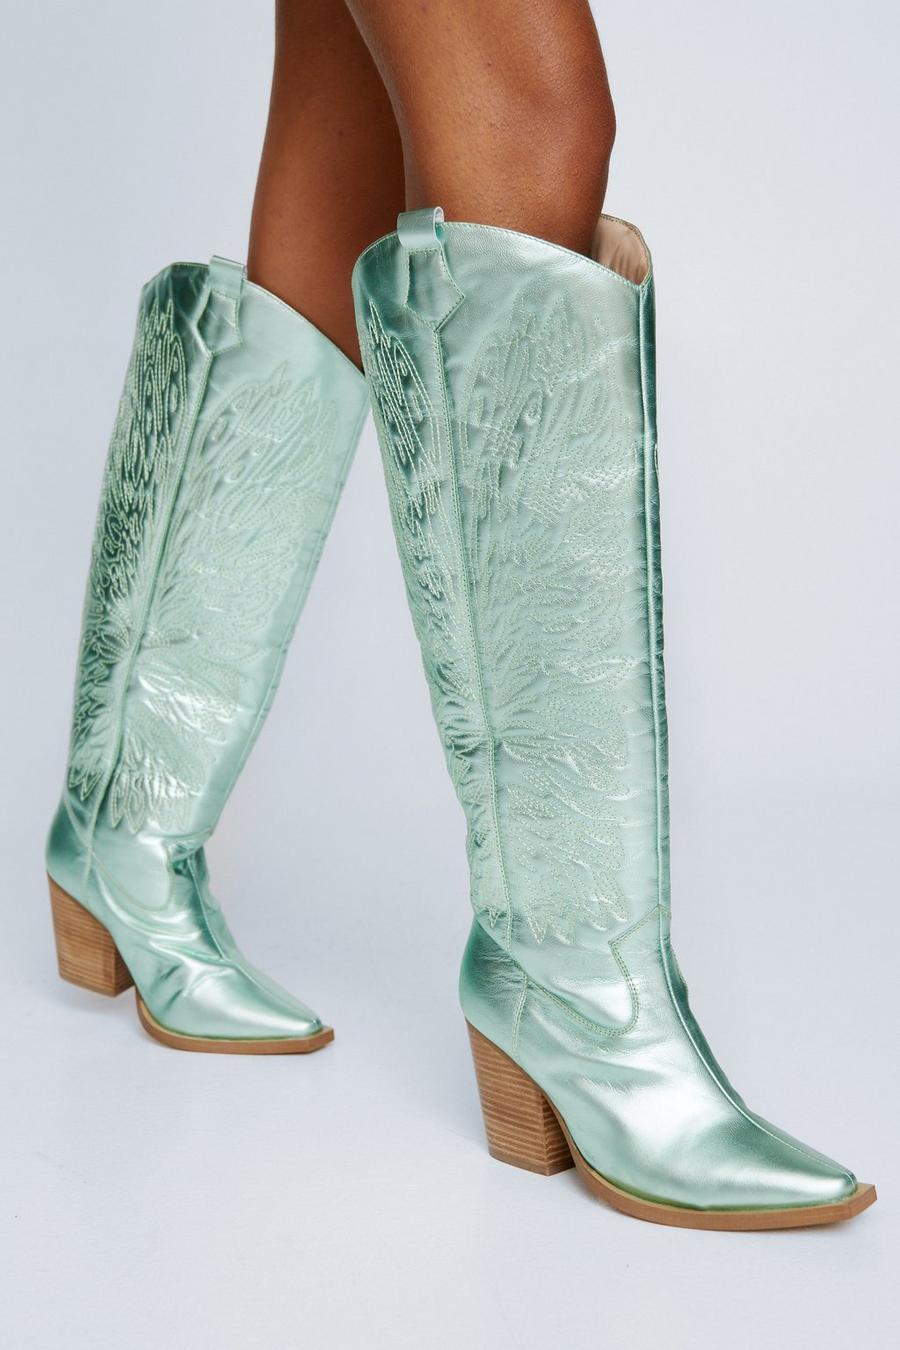 Women's Cowboy Boots | Cowgirl & Western Boots | Nasty Gal